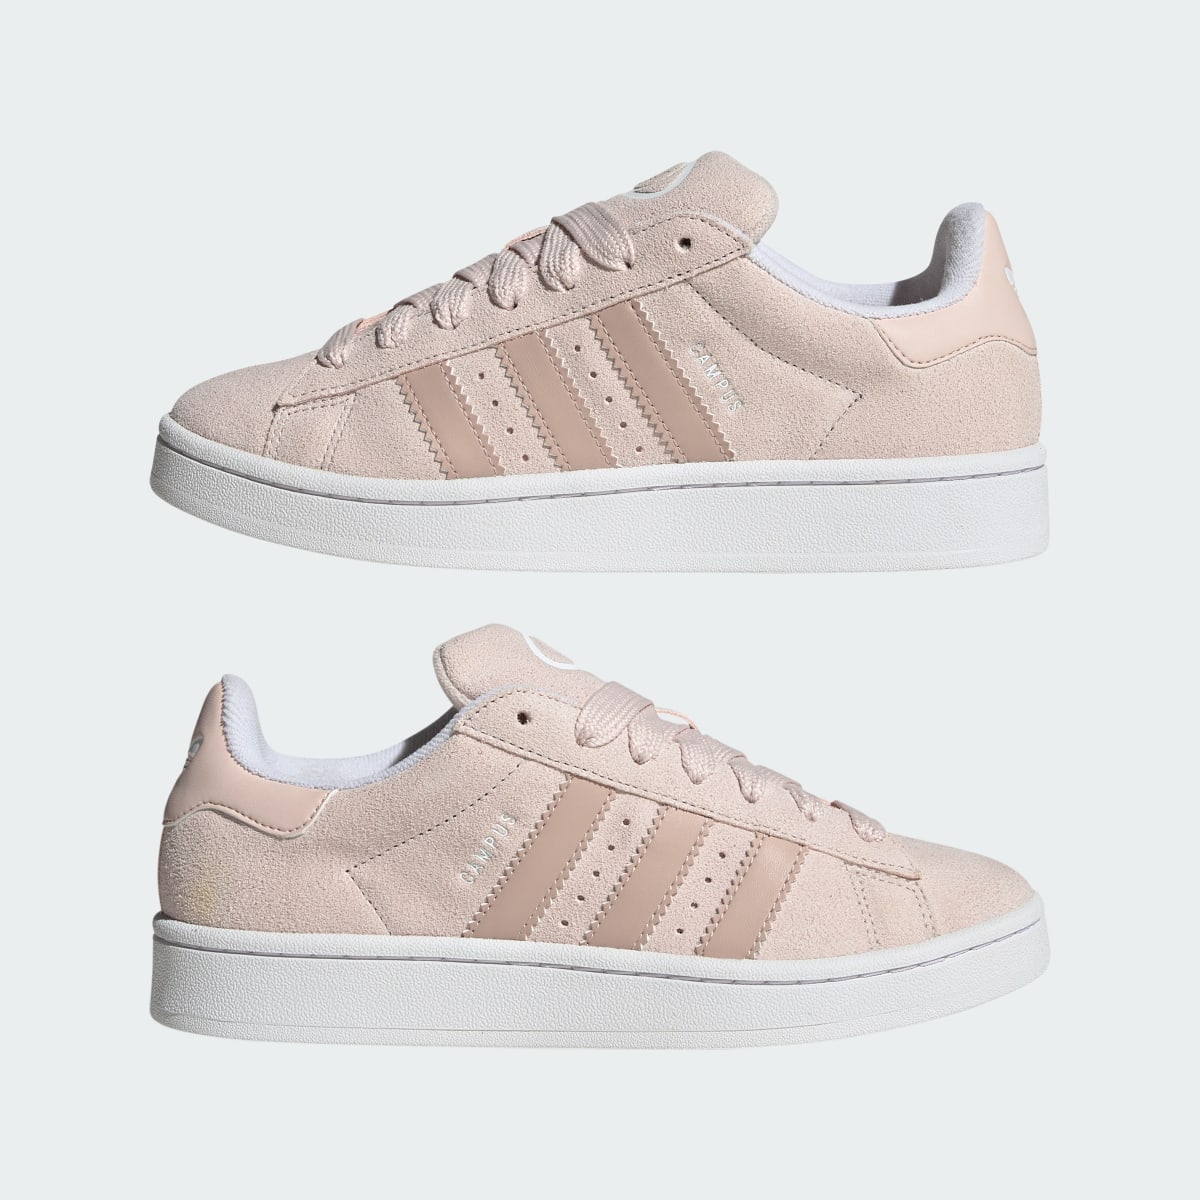 Adidas Campus 00s Shoes. 8